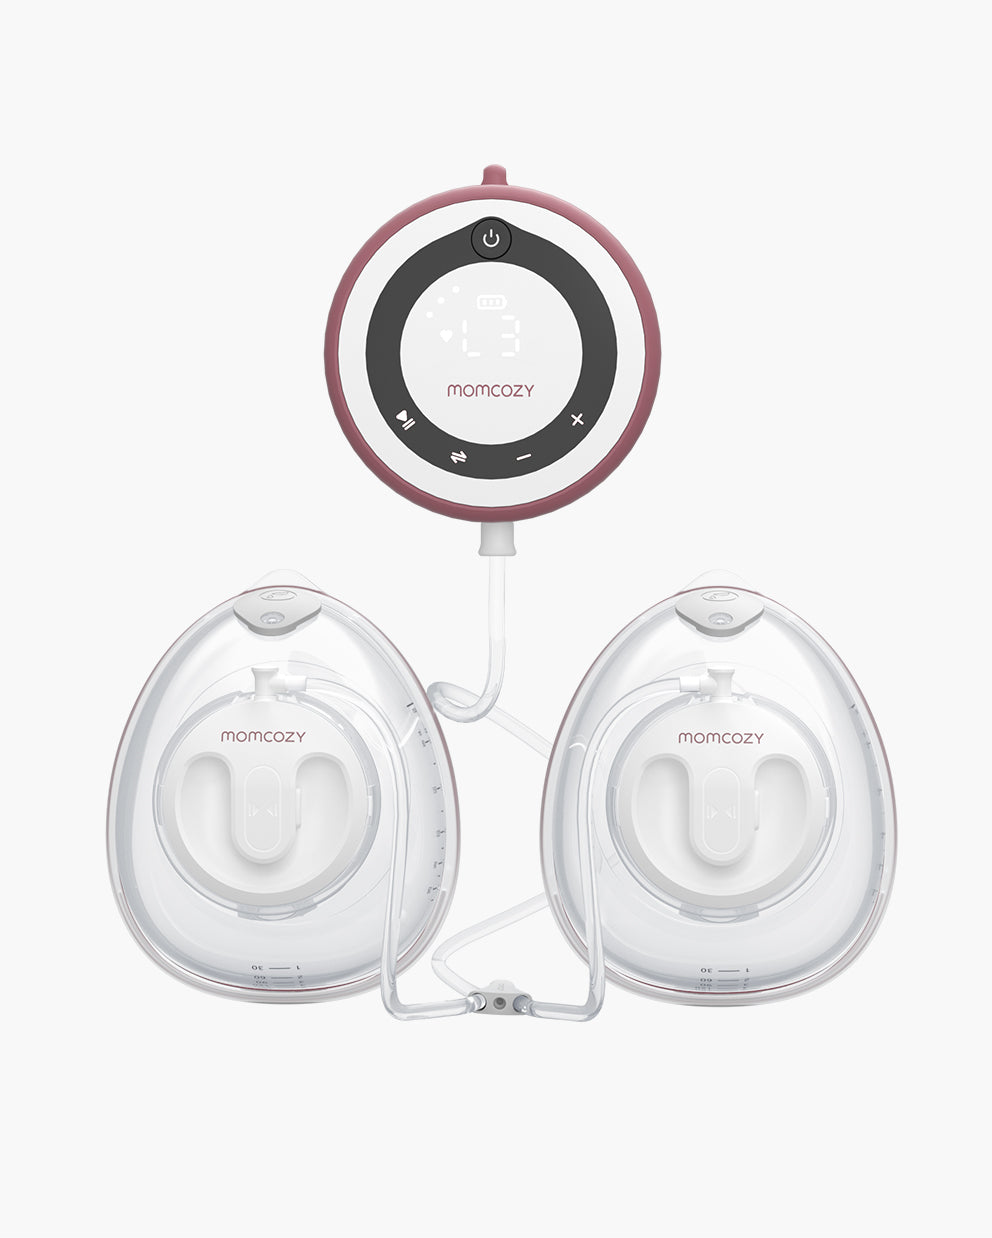 V1 Hands-Free Breast Pump: Unmatched Convenience & Performance